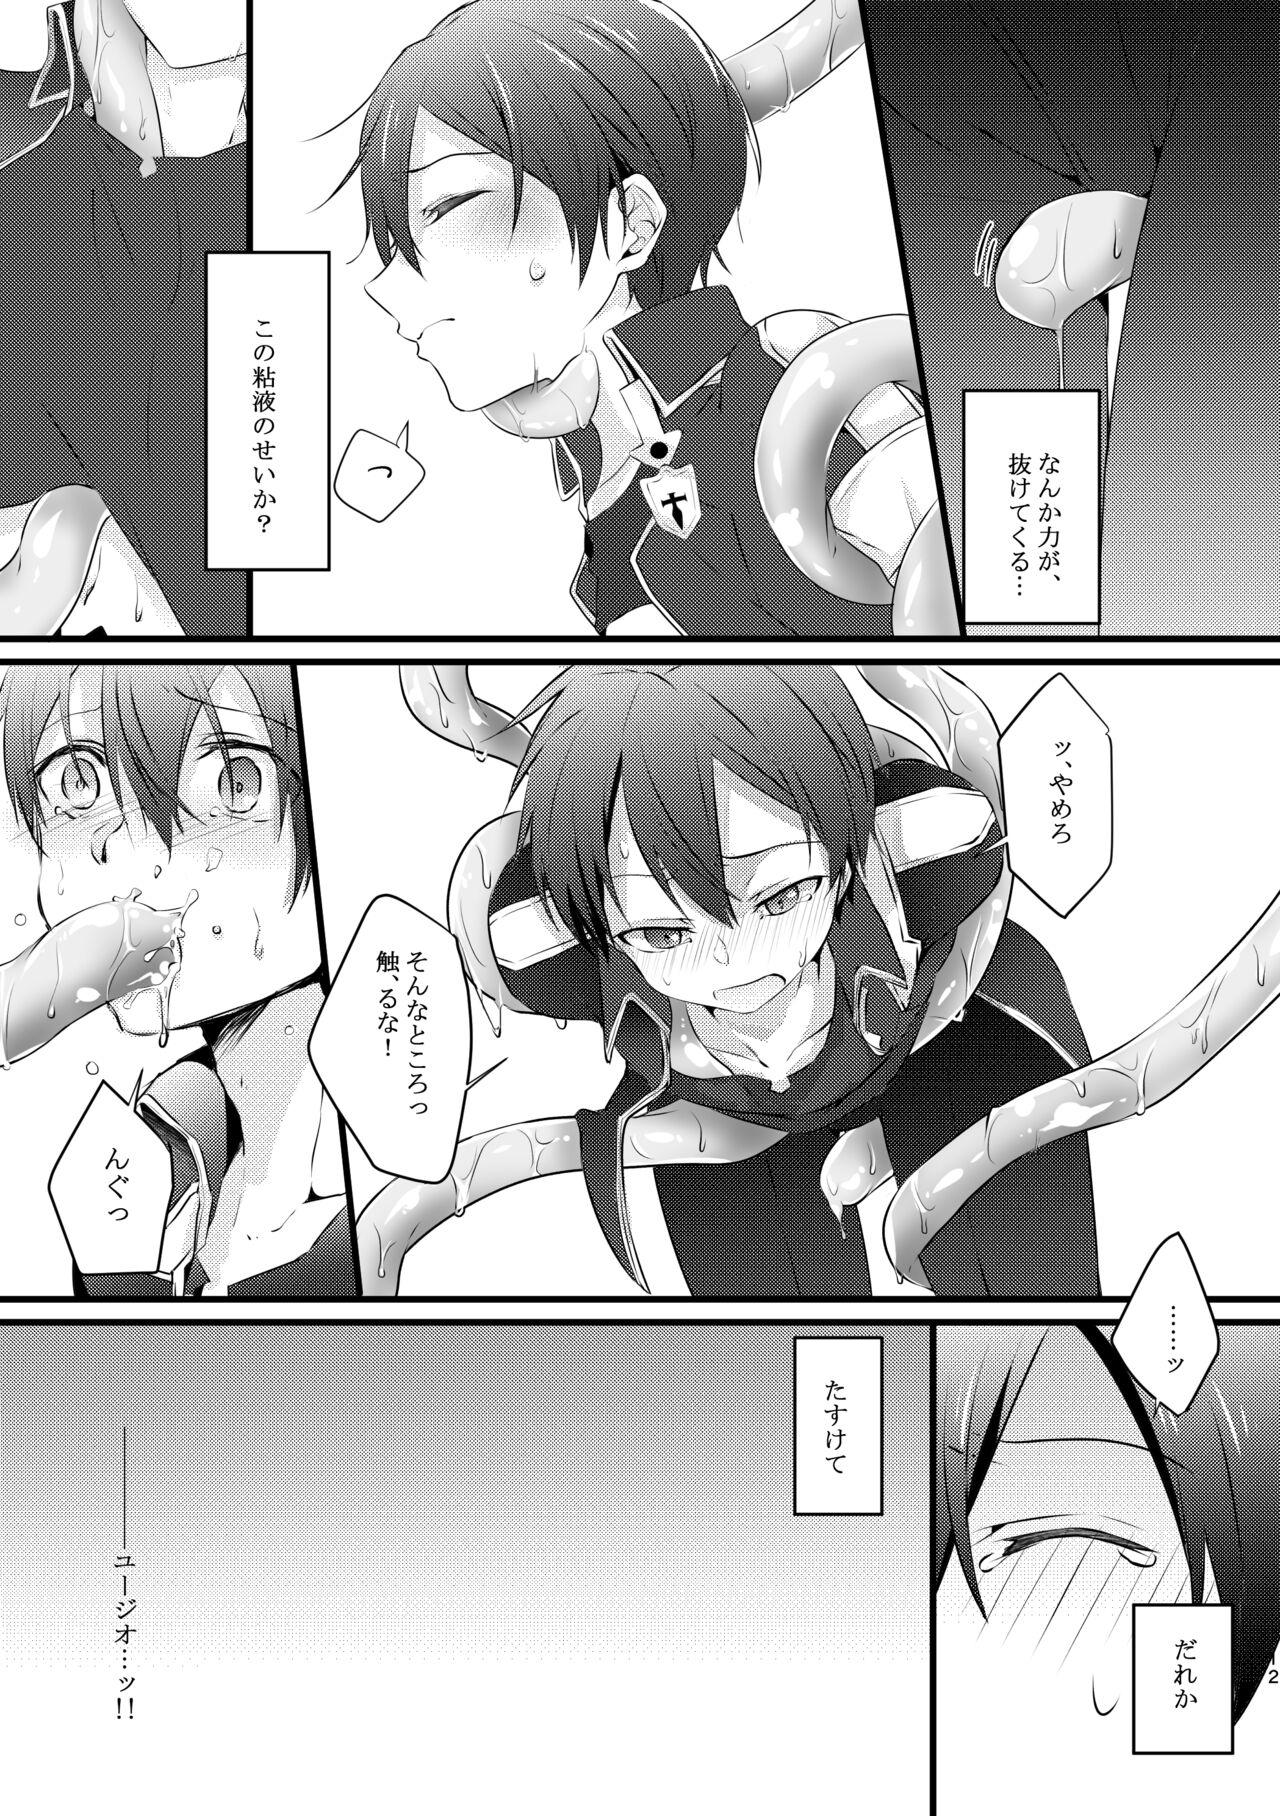 Para 触手ちゃんはユジキリが羨ましい！ - Sword art online Brother Sister - Page 11